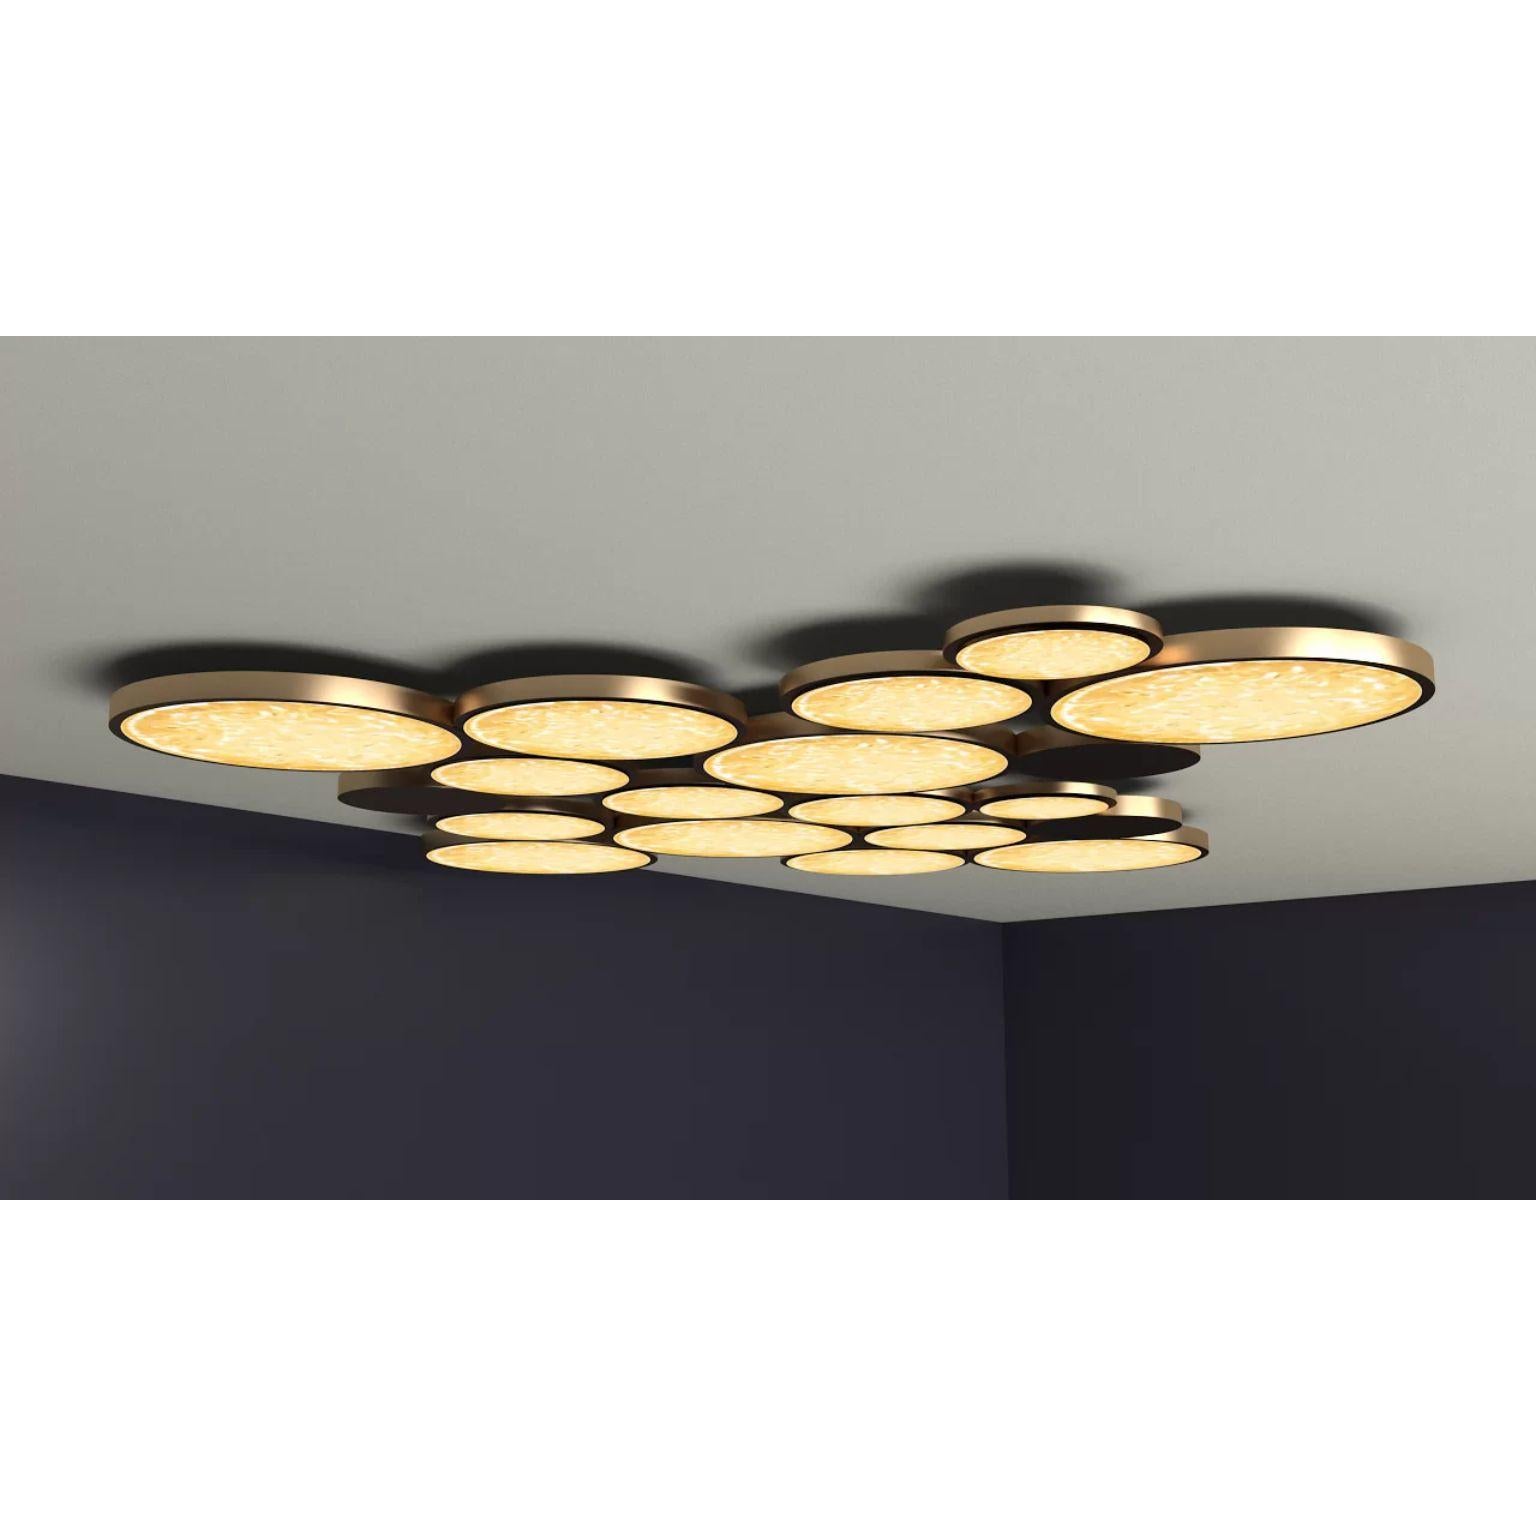 Circles Flush Mount by Dainte
Dimensions: Ø 122 x H 50 cm.
Materials: Glass and brass. 

Dimensions may vary. Please contact us. 

A extraordinary mega circular chandelier featuring a combination of twelve textured glassand brass circles to create